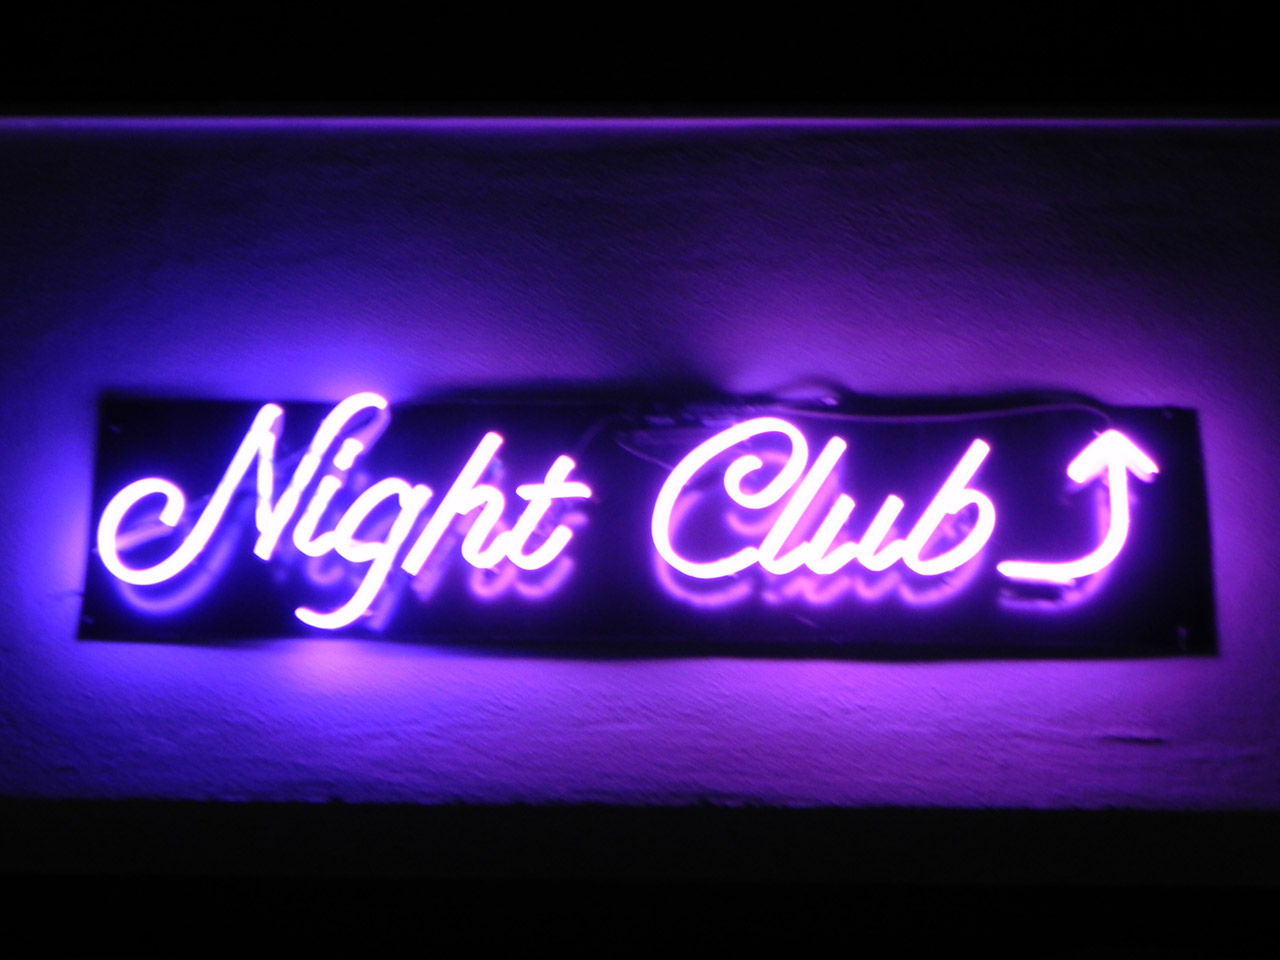 nightclub in neon 108681294533967qk7 - Preparing for that big night out